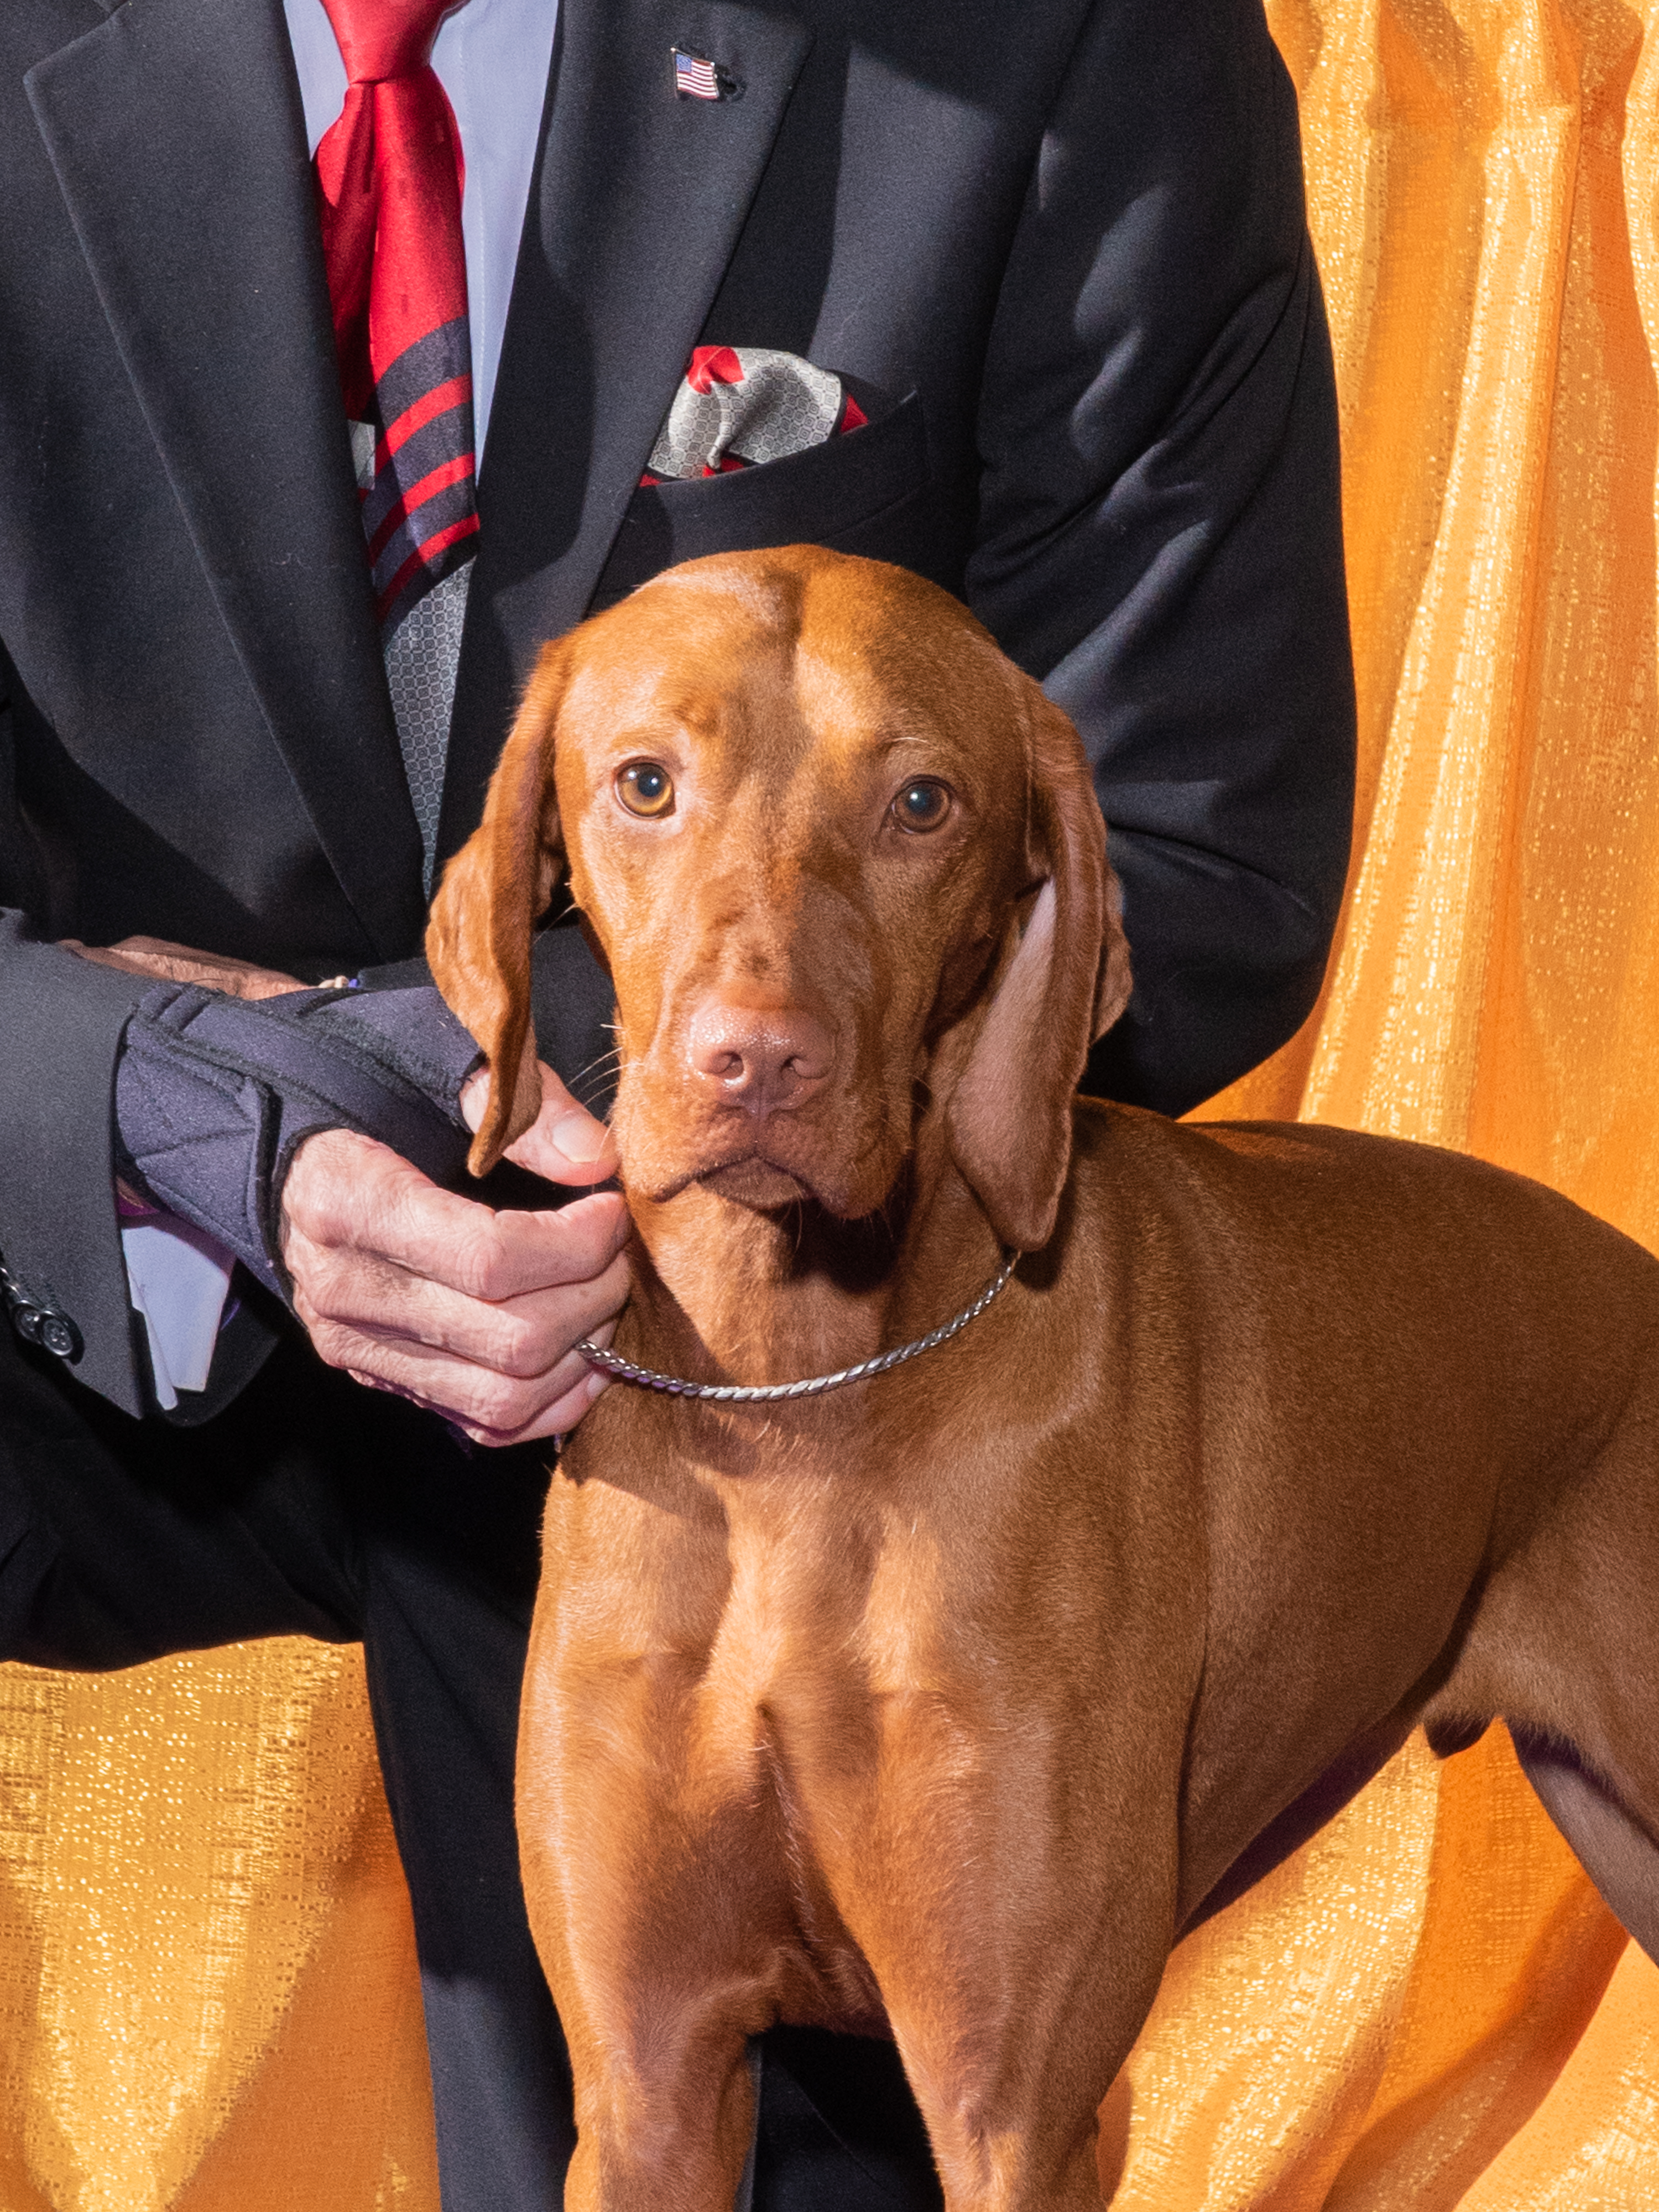 Cessi, a Vizsla, poses for a portrait with his owner Joe Diaz on Feb. 11, 2020 at the Westminster Dog Show.